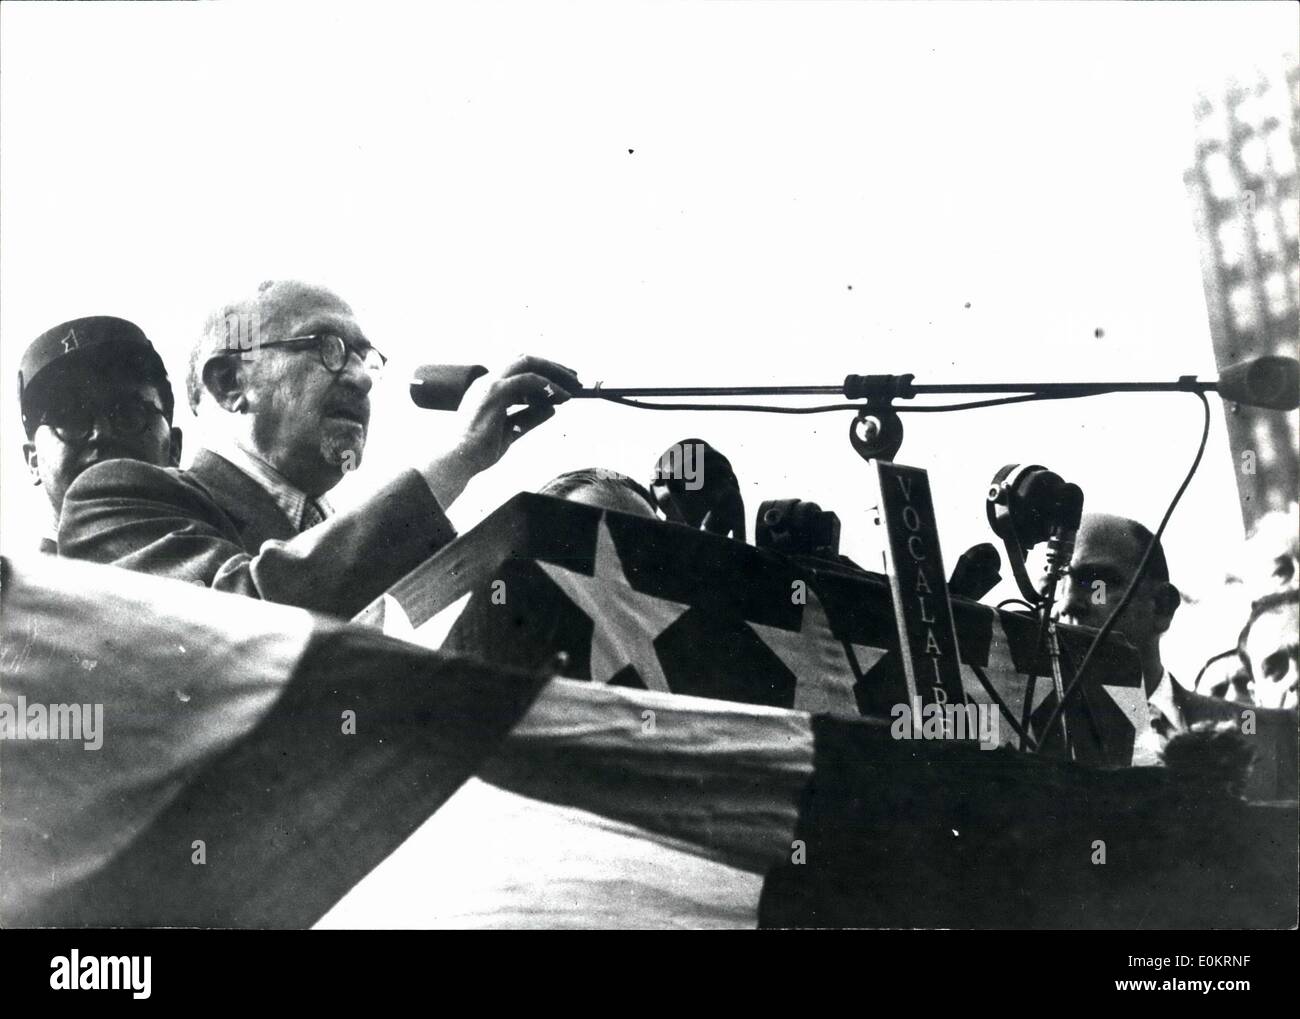 May 09, 1949 - Israel President Chaim Weizmann at a conference Stock Photo